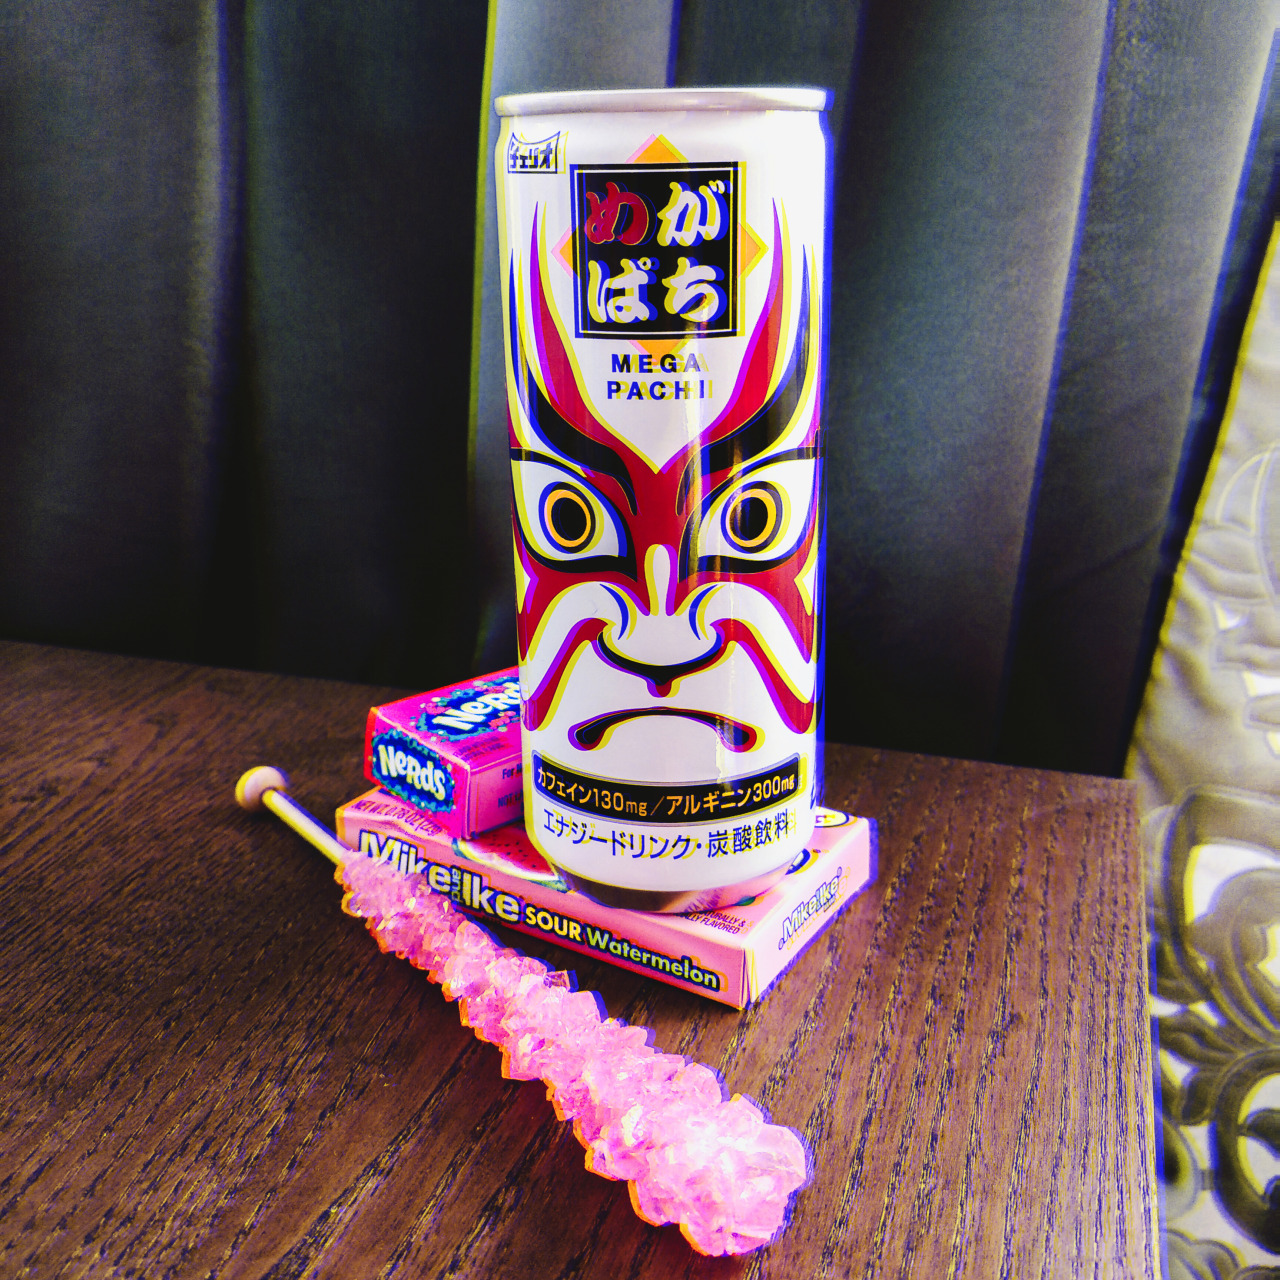 #energy drink#energy drinks#mega pachi#nerds#mike#pink#pink aesthetic#pink candy